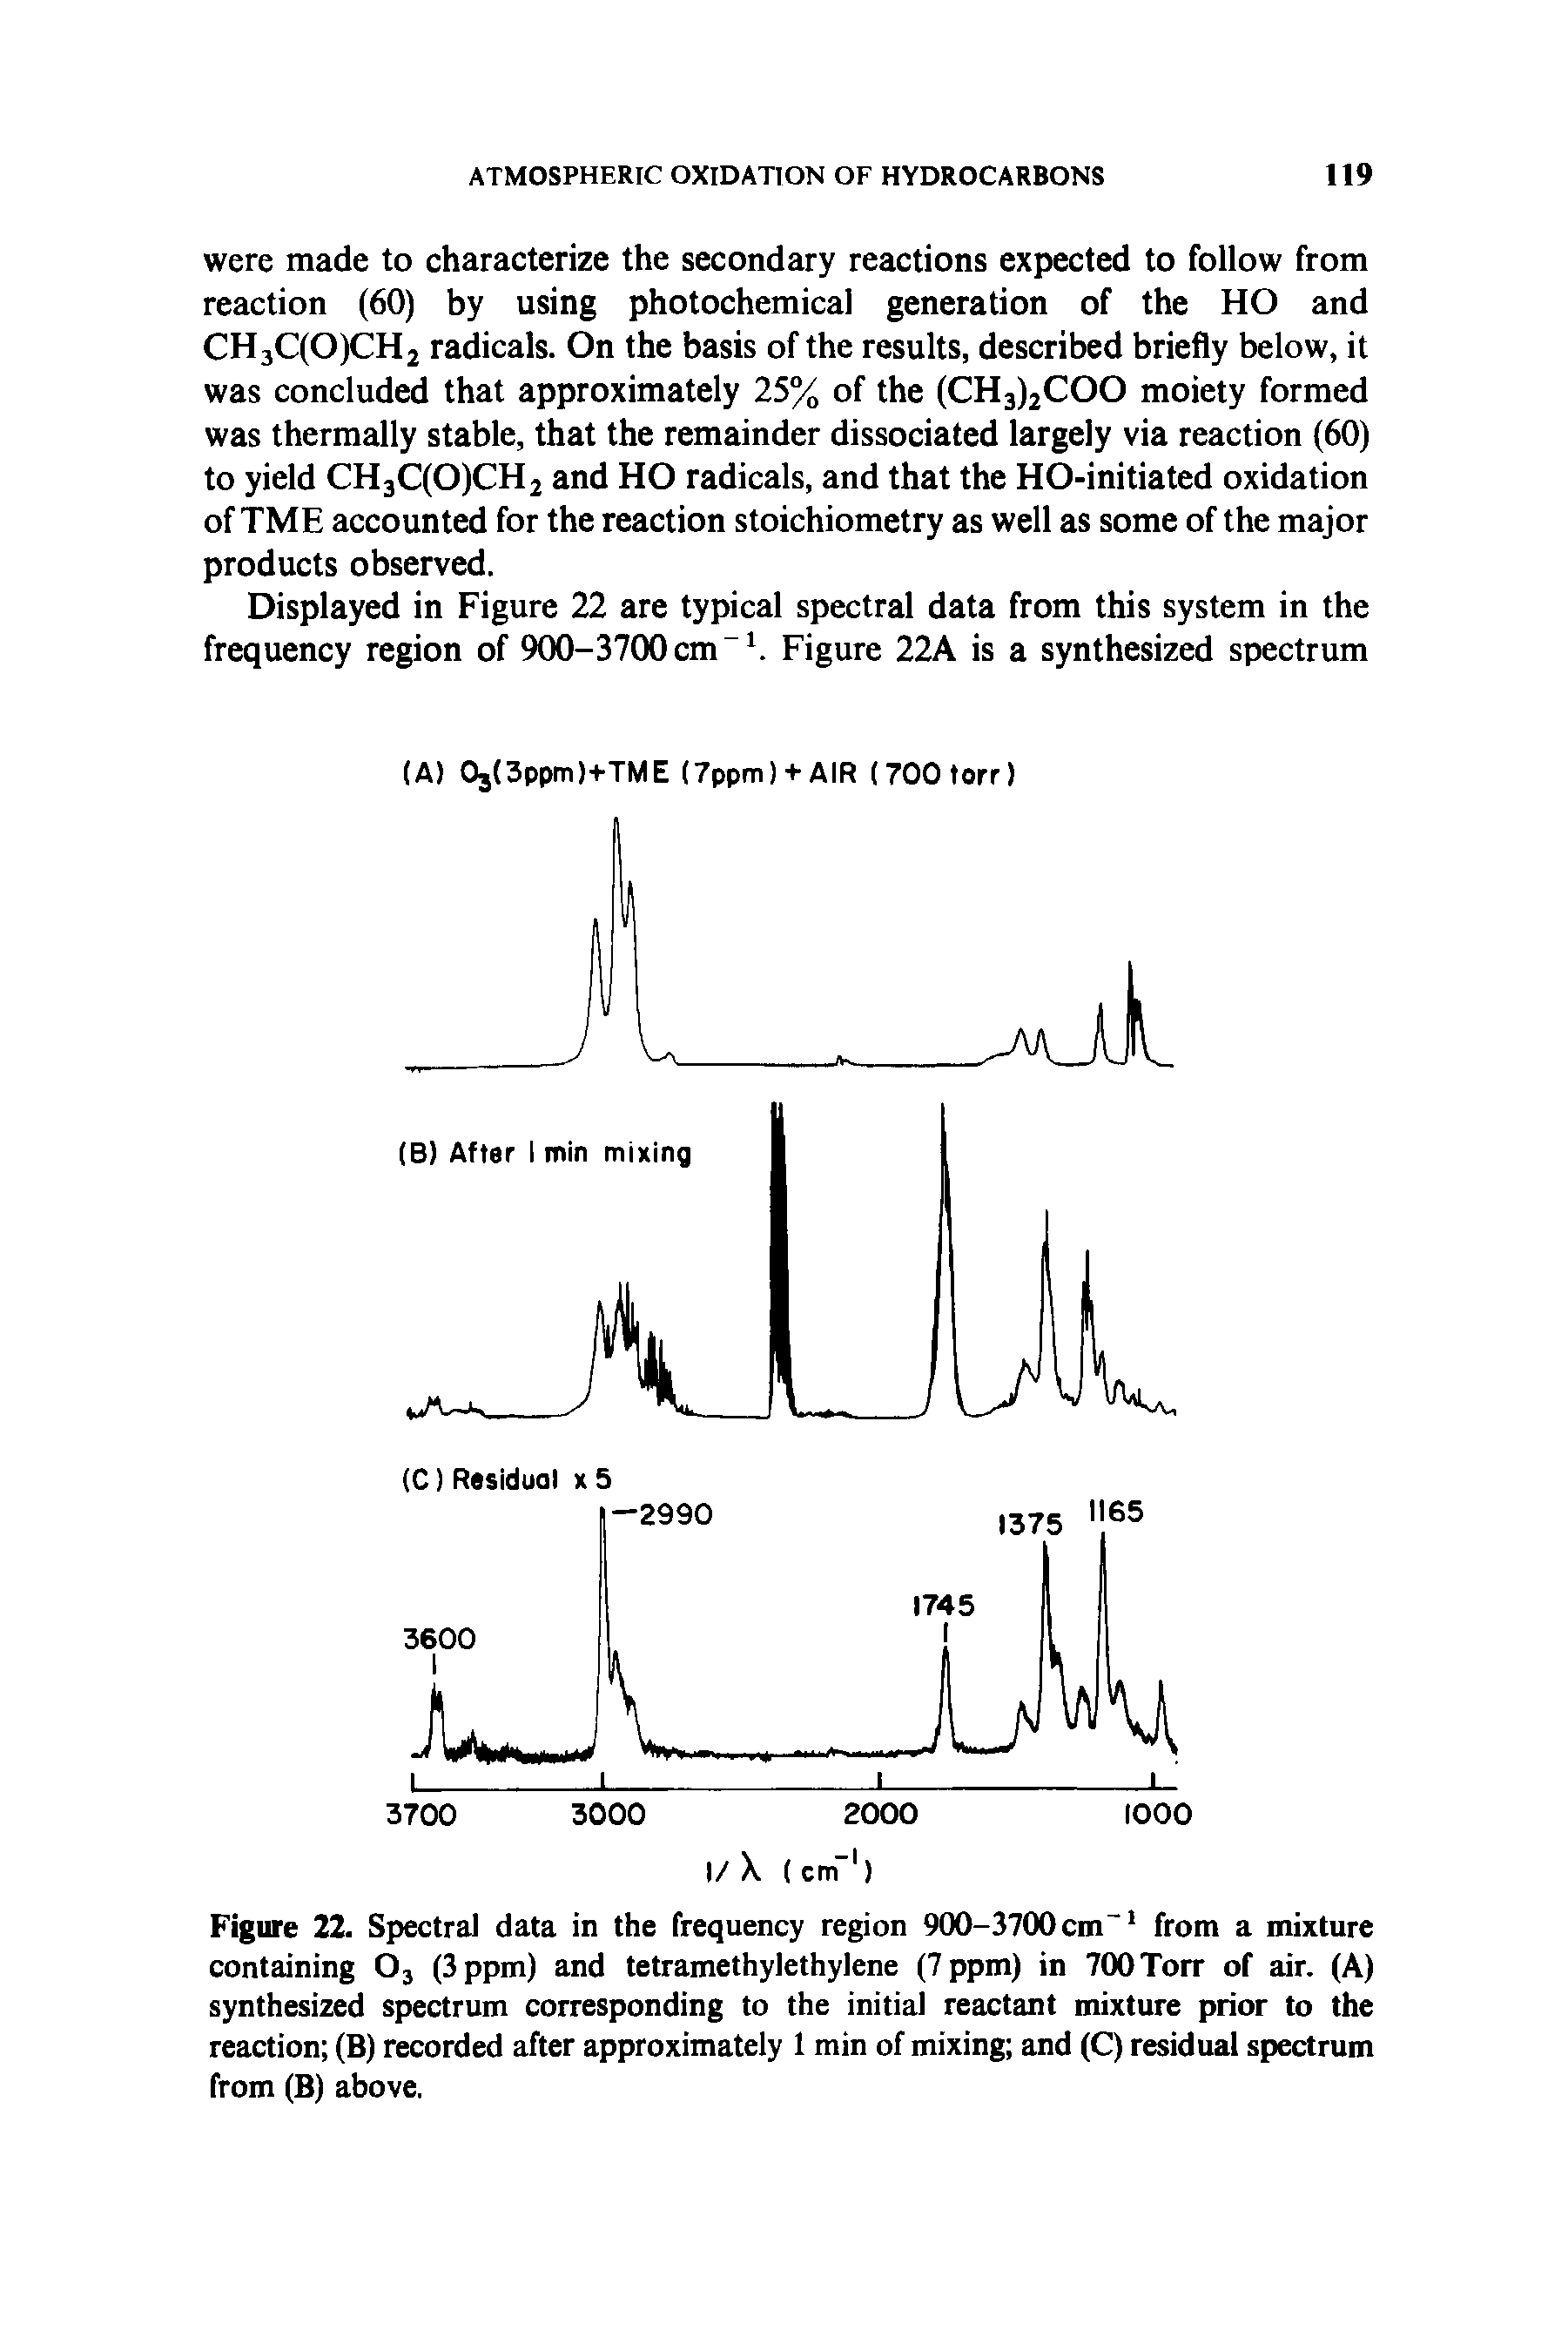 Figure 22. Spectral data in the frequency region 900-3700cm-1 from a mixture containing 03 (3 ppm) and tetramethylethylene (7 ppm) in 700Torr of air. (A) synthesized spectrum corresponding to the initial reactant mixture prior to the reaction (B) recorded after approximately 1 min of mixing and (C) residual spectrum from (B) above.